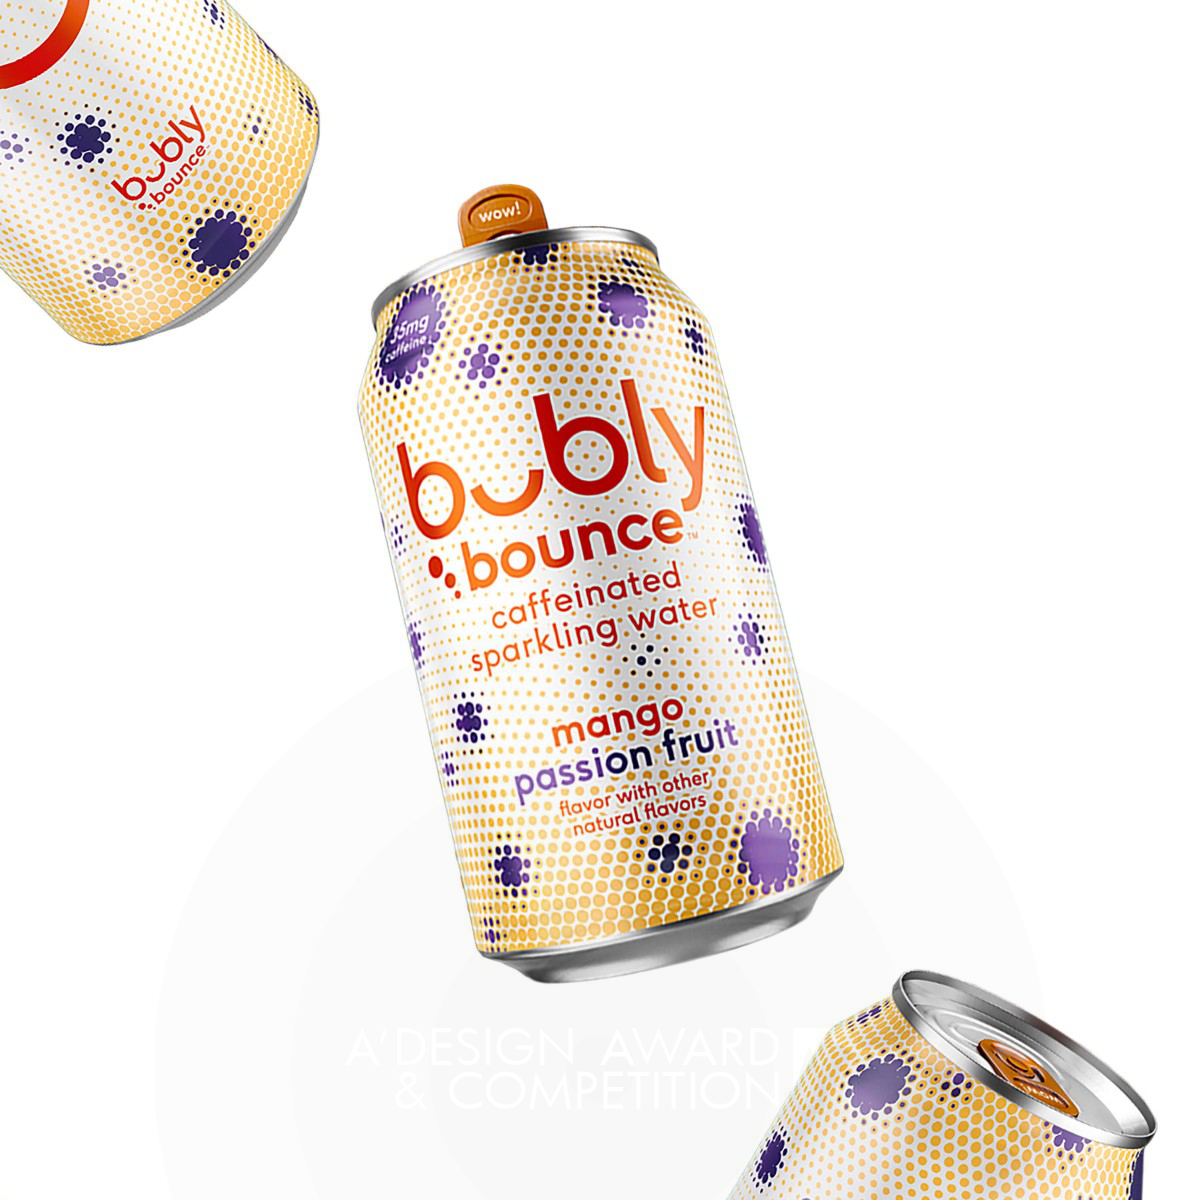 Bubly Bounce Beverage Packaging by PepsiCo Design and Innovation Iron Packaging Design Award Winner 2022 